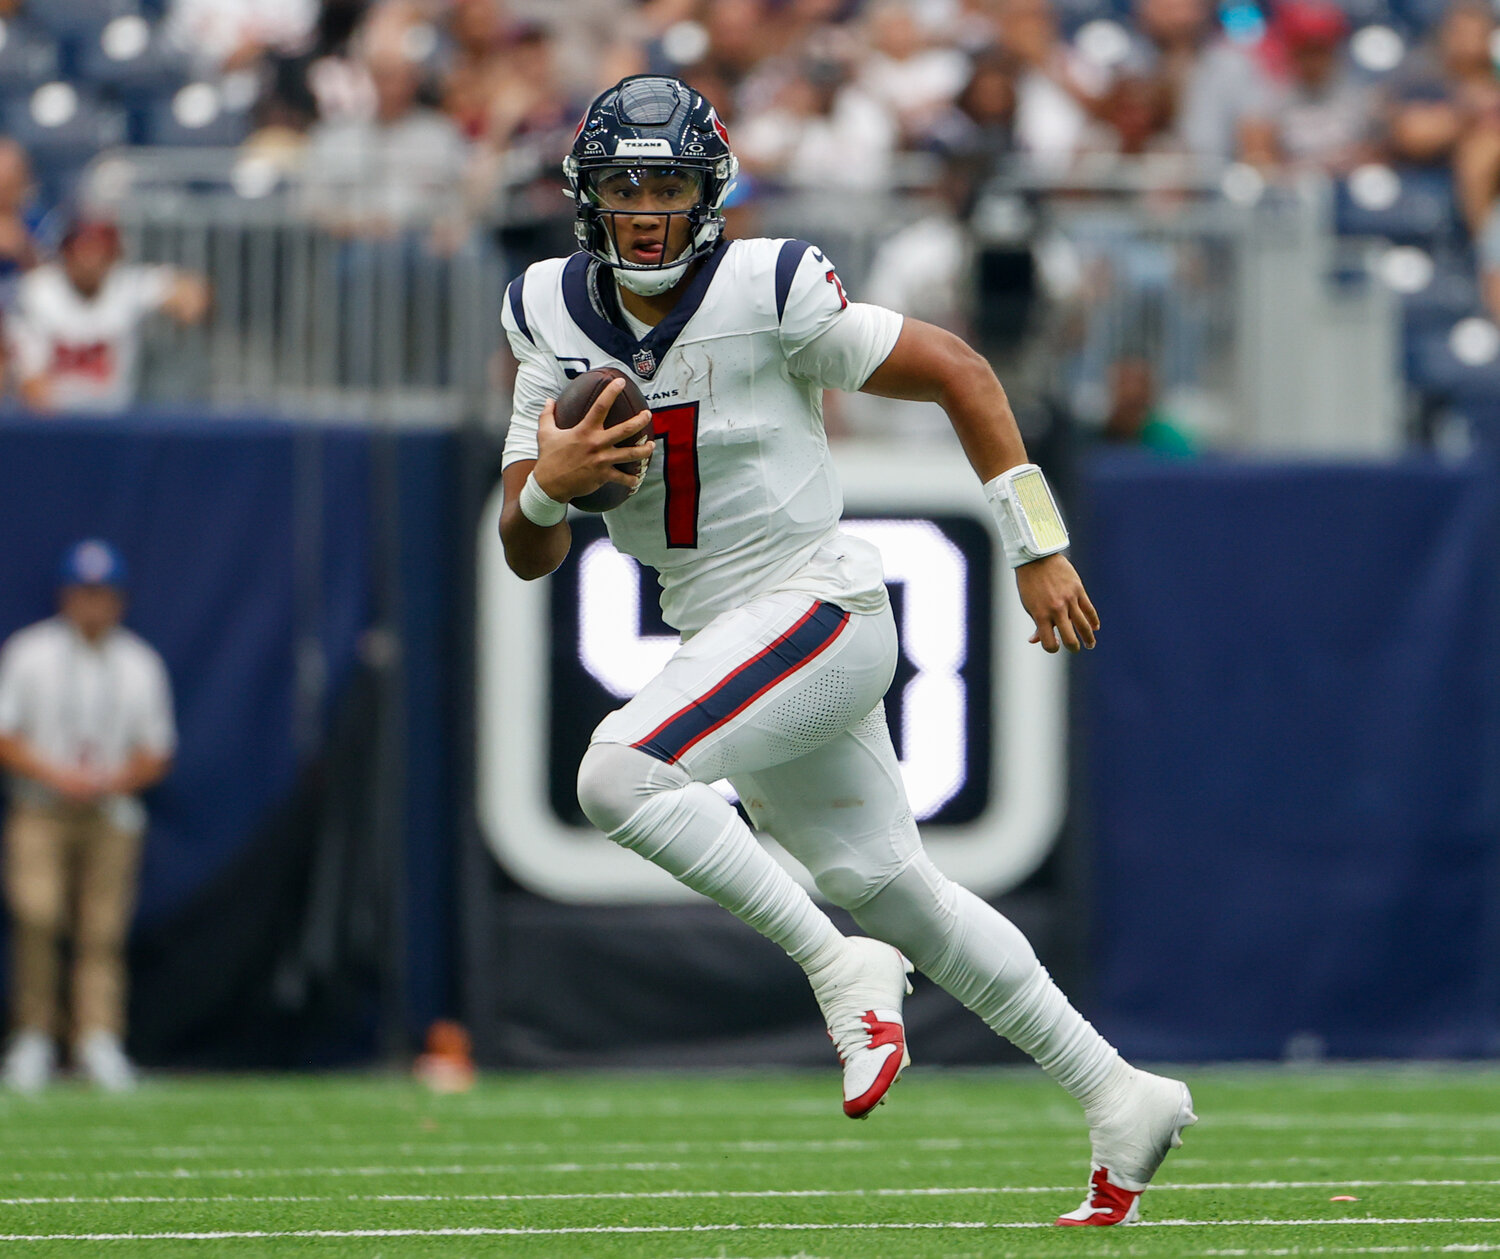 Texans quarterback C.J. Stroud (7) scrambles to escape pressure during an NFL game between the Texans and the Colts on September 17, 2023 in Houston. The Colts won, 31-20.